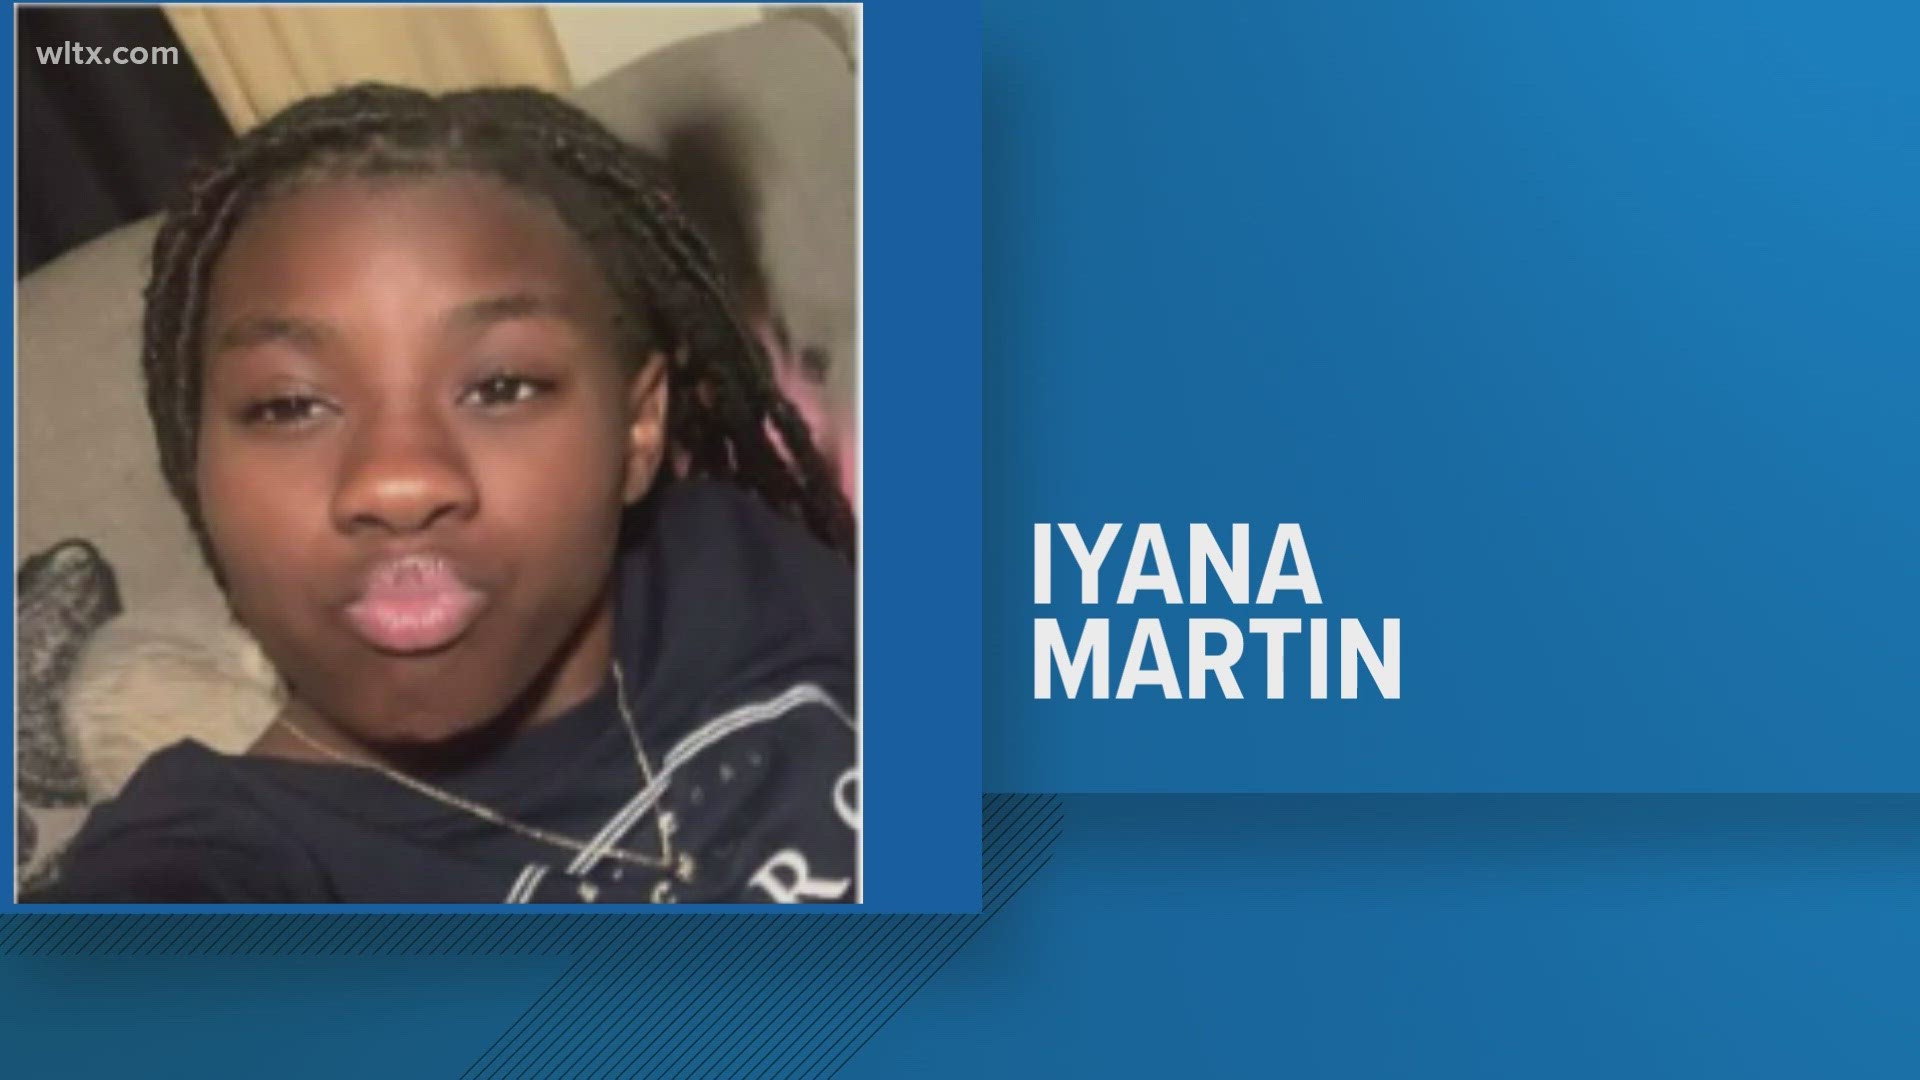 Iyana Martin, 12, ran away from home Friday night from the Bradd street area in Sumter.